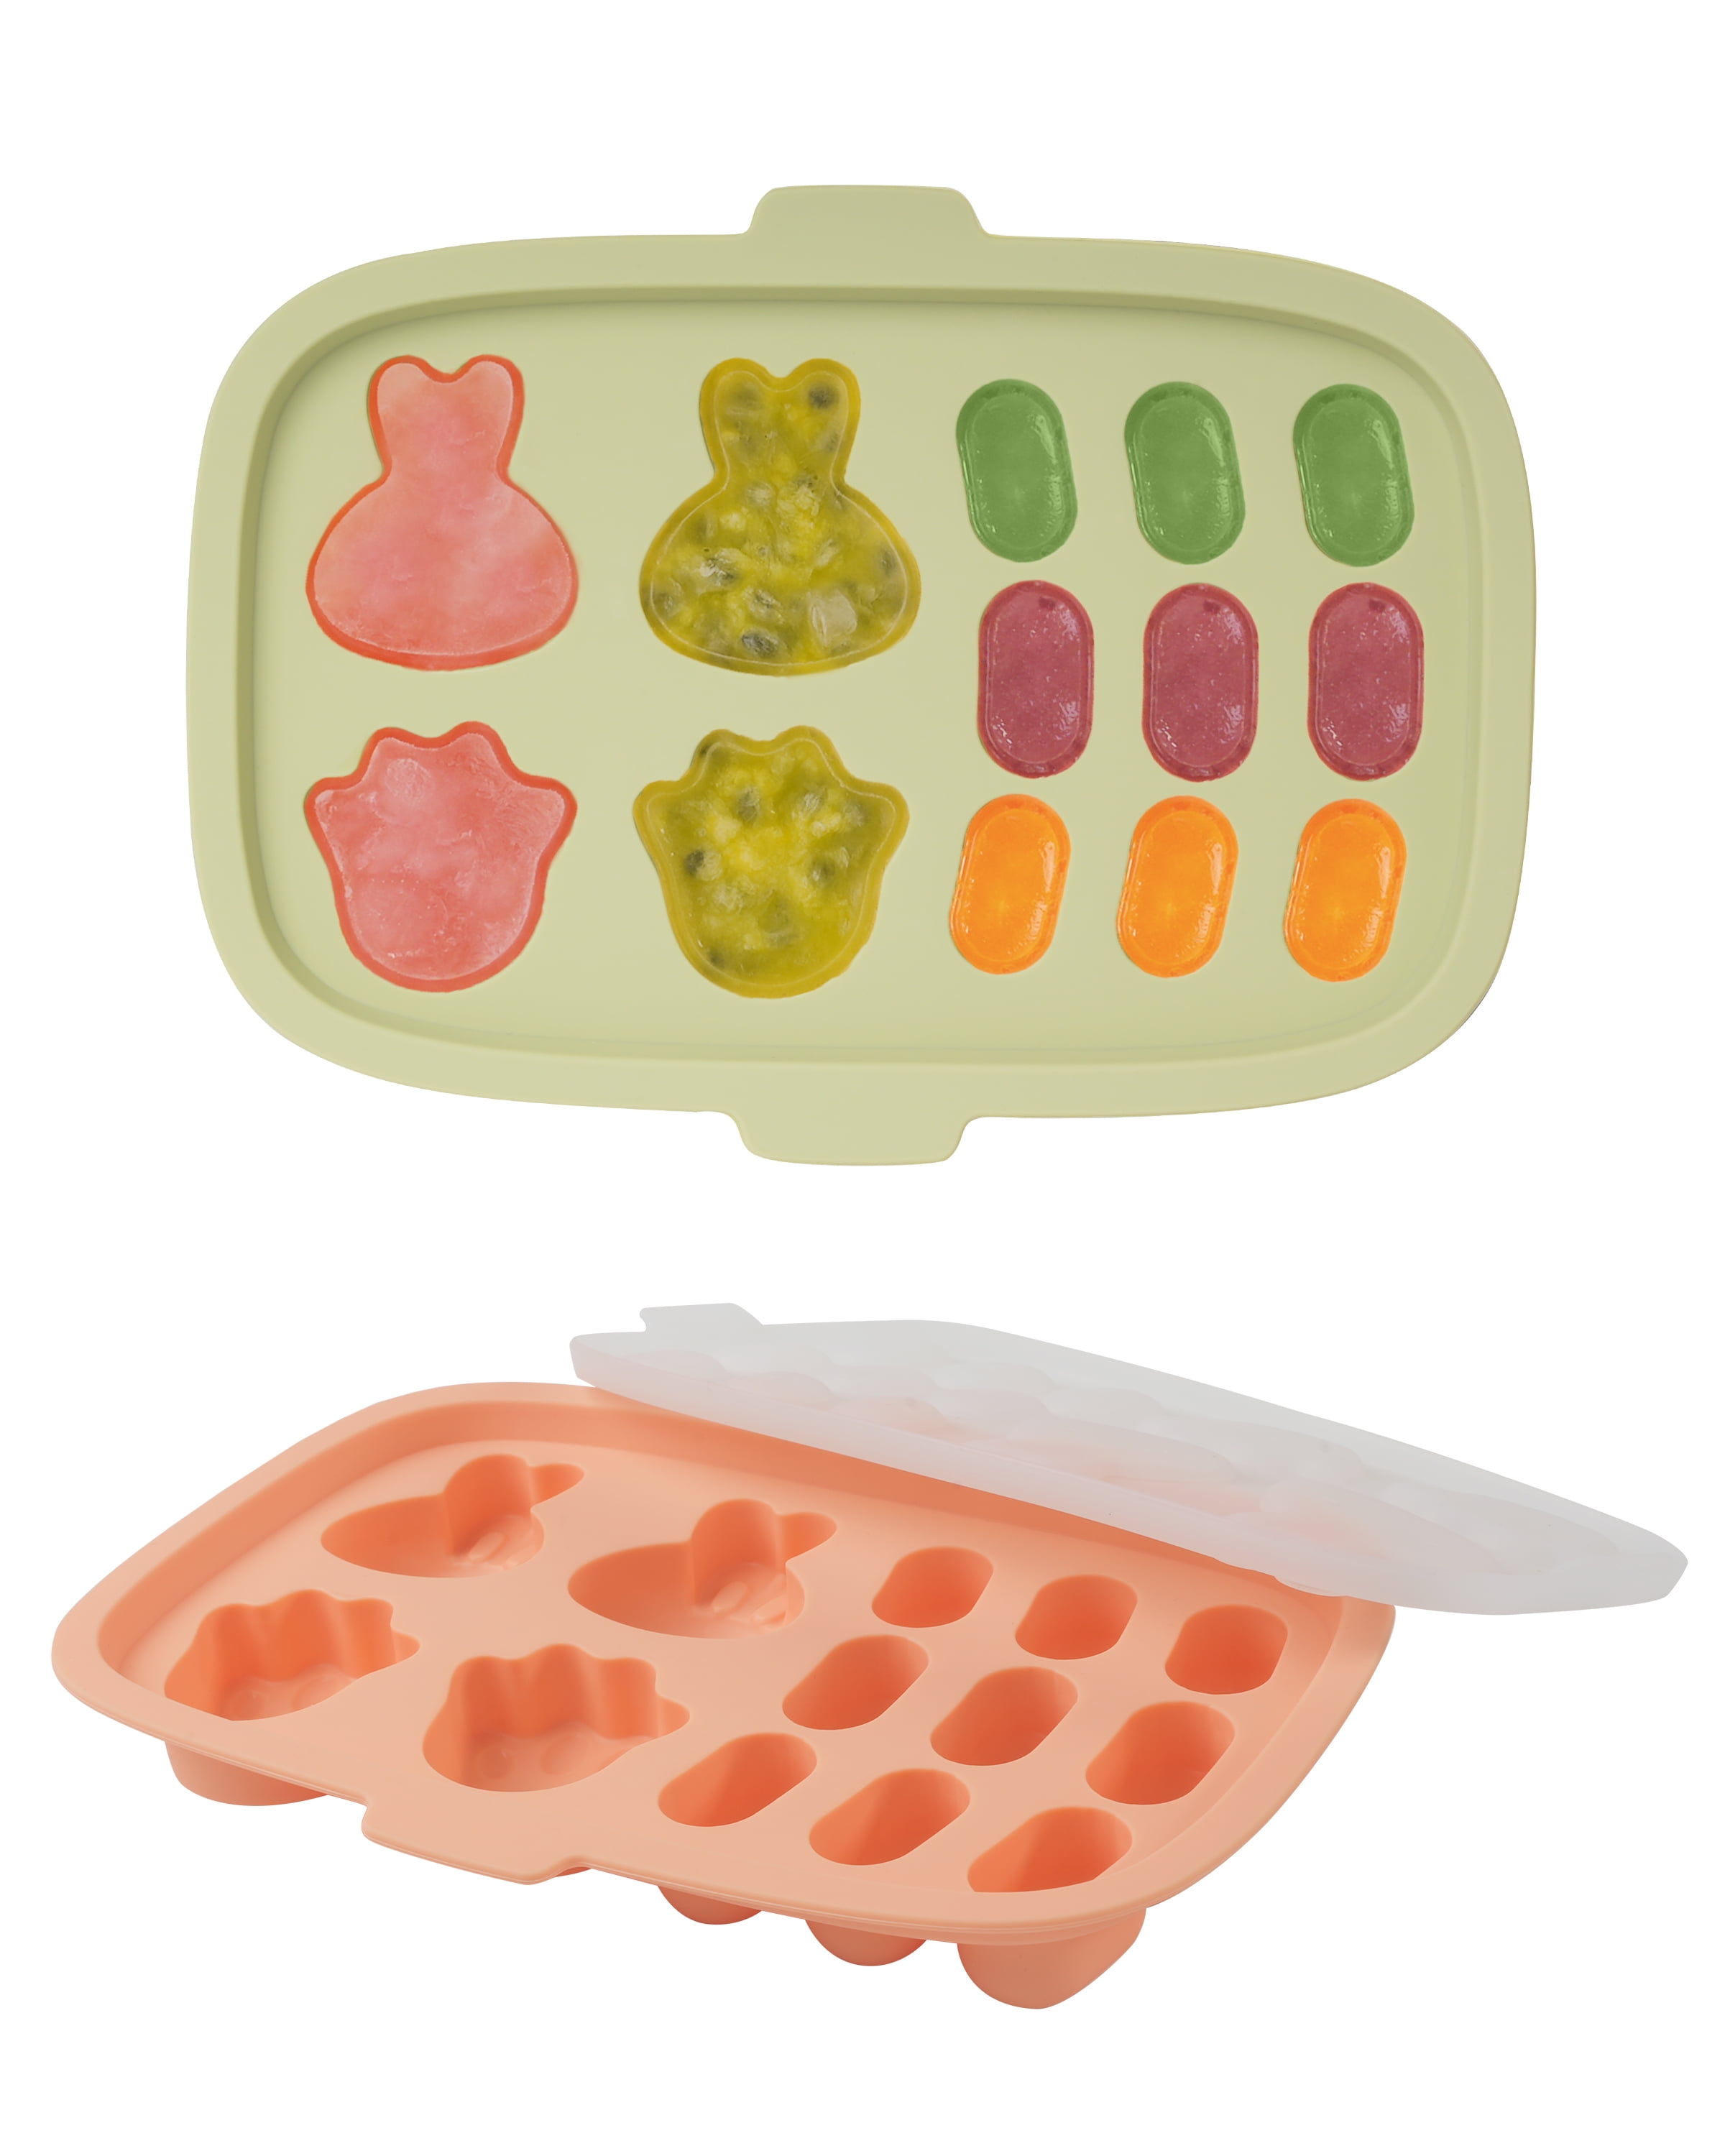 Ludlz Silicone Baby Food Freezer Tray Fruit Star Shape Ice Cube Mold - Perfect Storage Container for Homemade Baby Food, Vegetable & Fruit Purees and